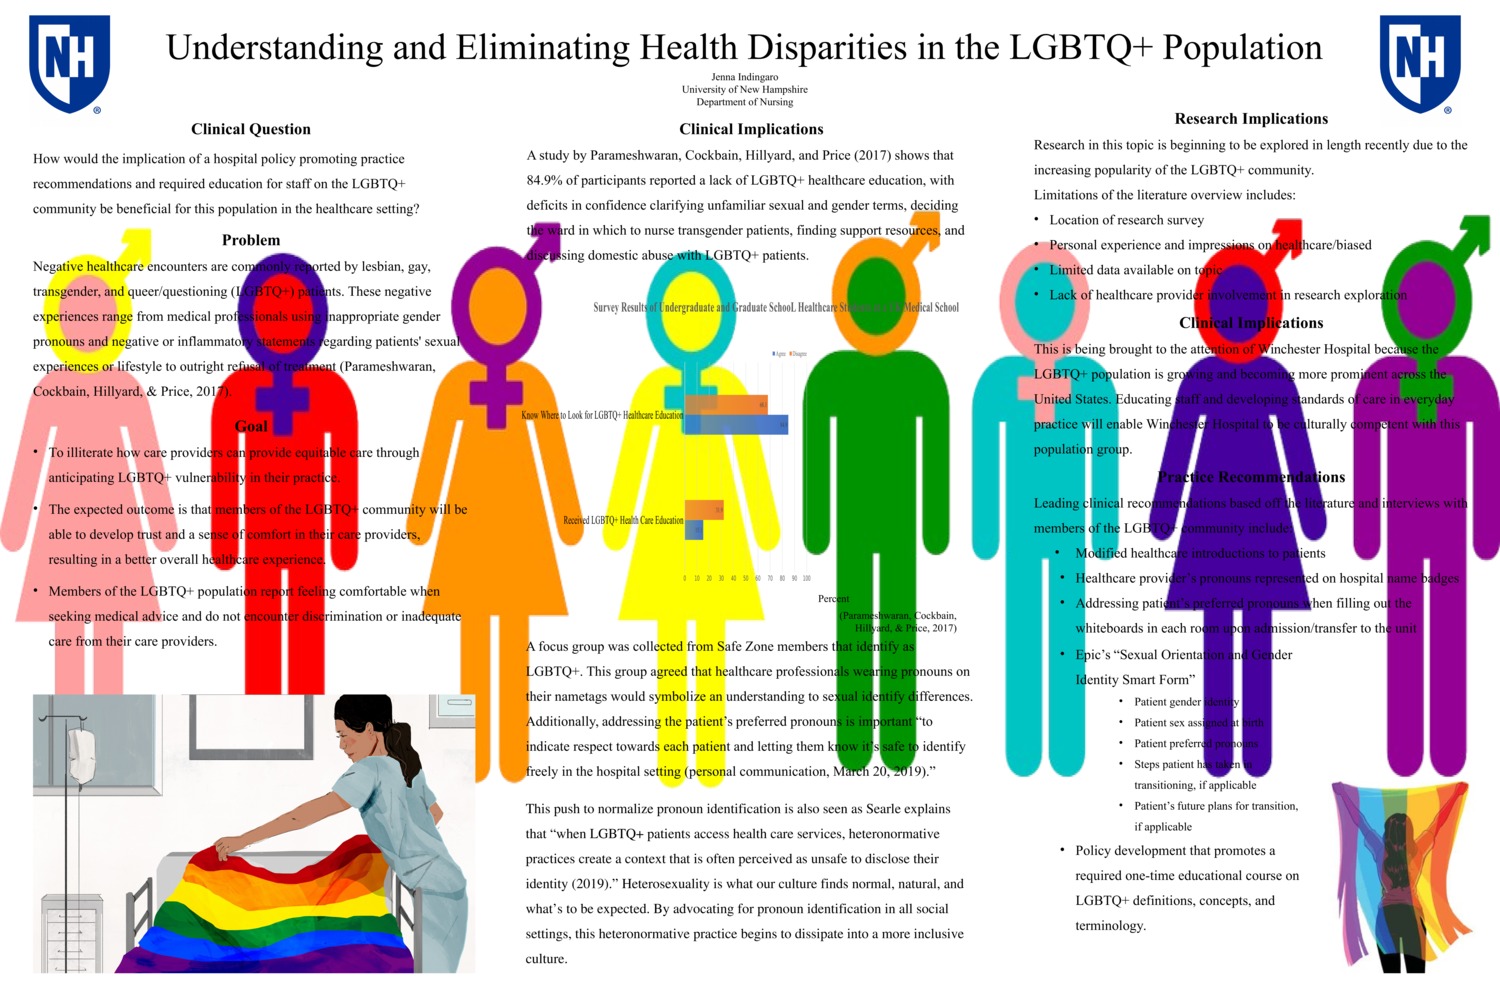 Understanding And Eliminating Health Disparities In The Lgbtq+ Population by jmi1003